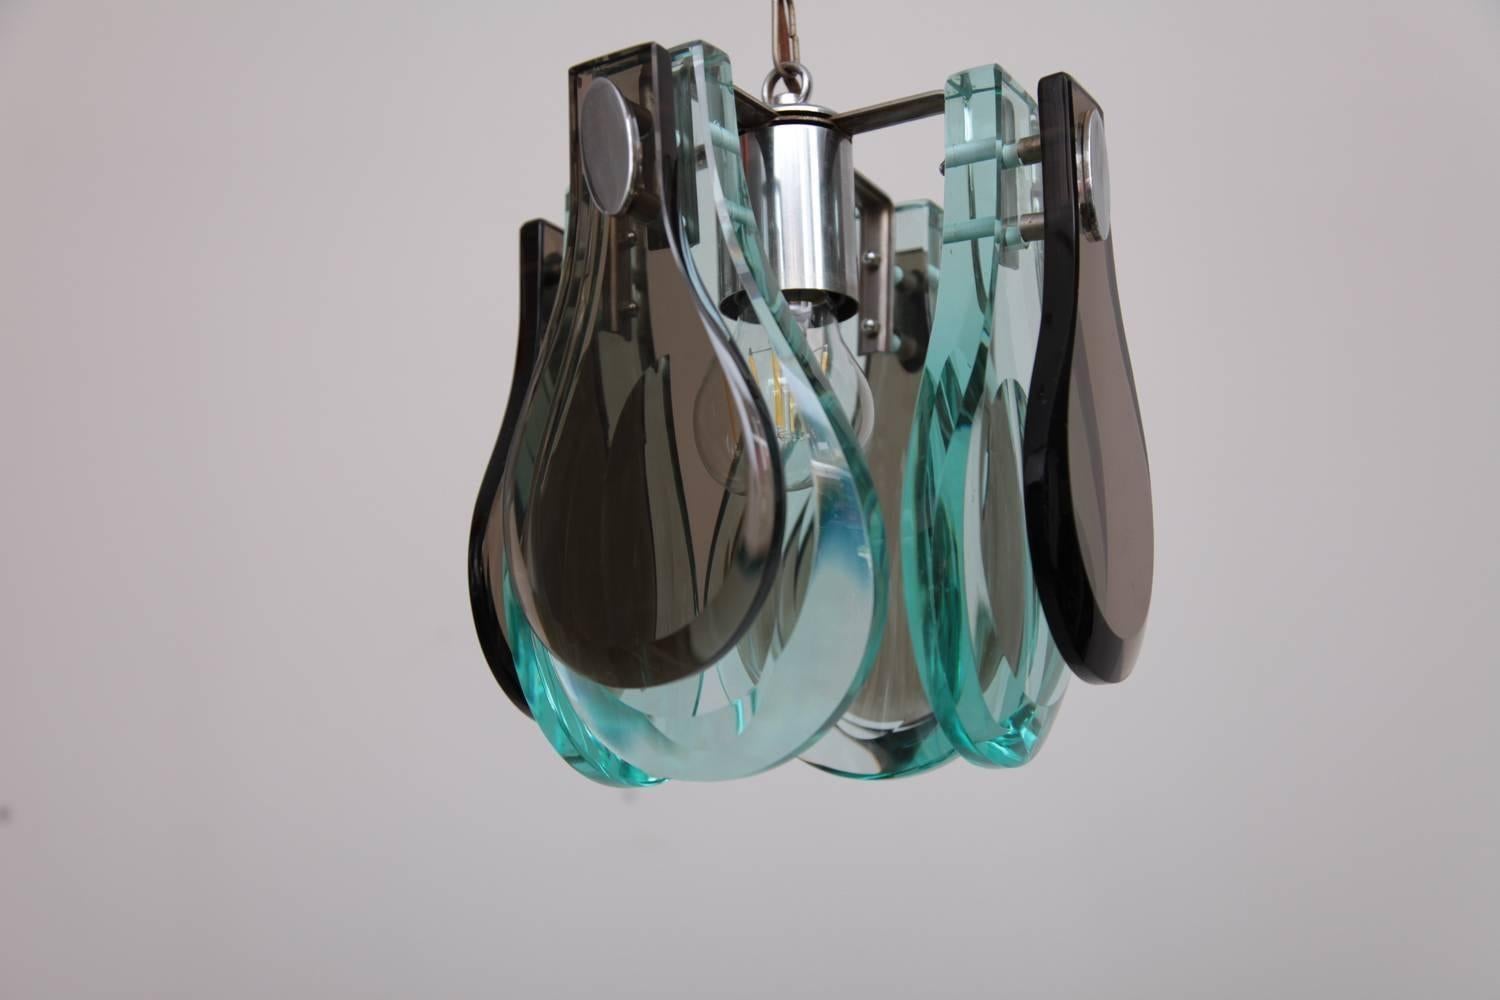 High quality Fontana Arte style pendant lamp with eight heavy and thick glass pieces in brown and clear. One E27.
To be on the safe side, the lamp should be checked locally by a specialist concerning local requirements.

